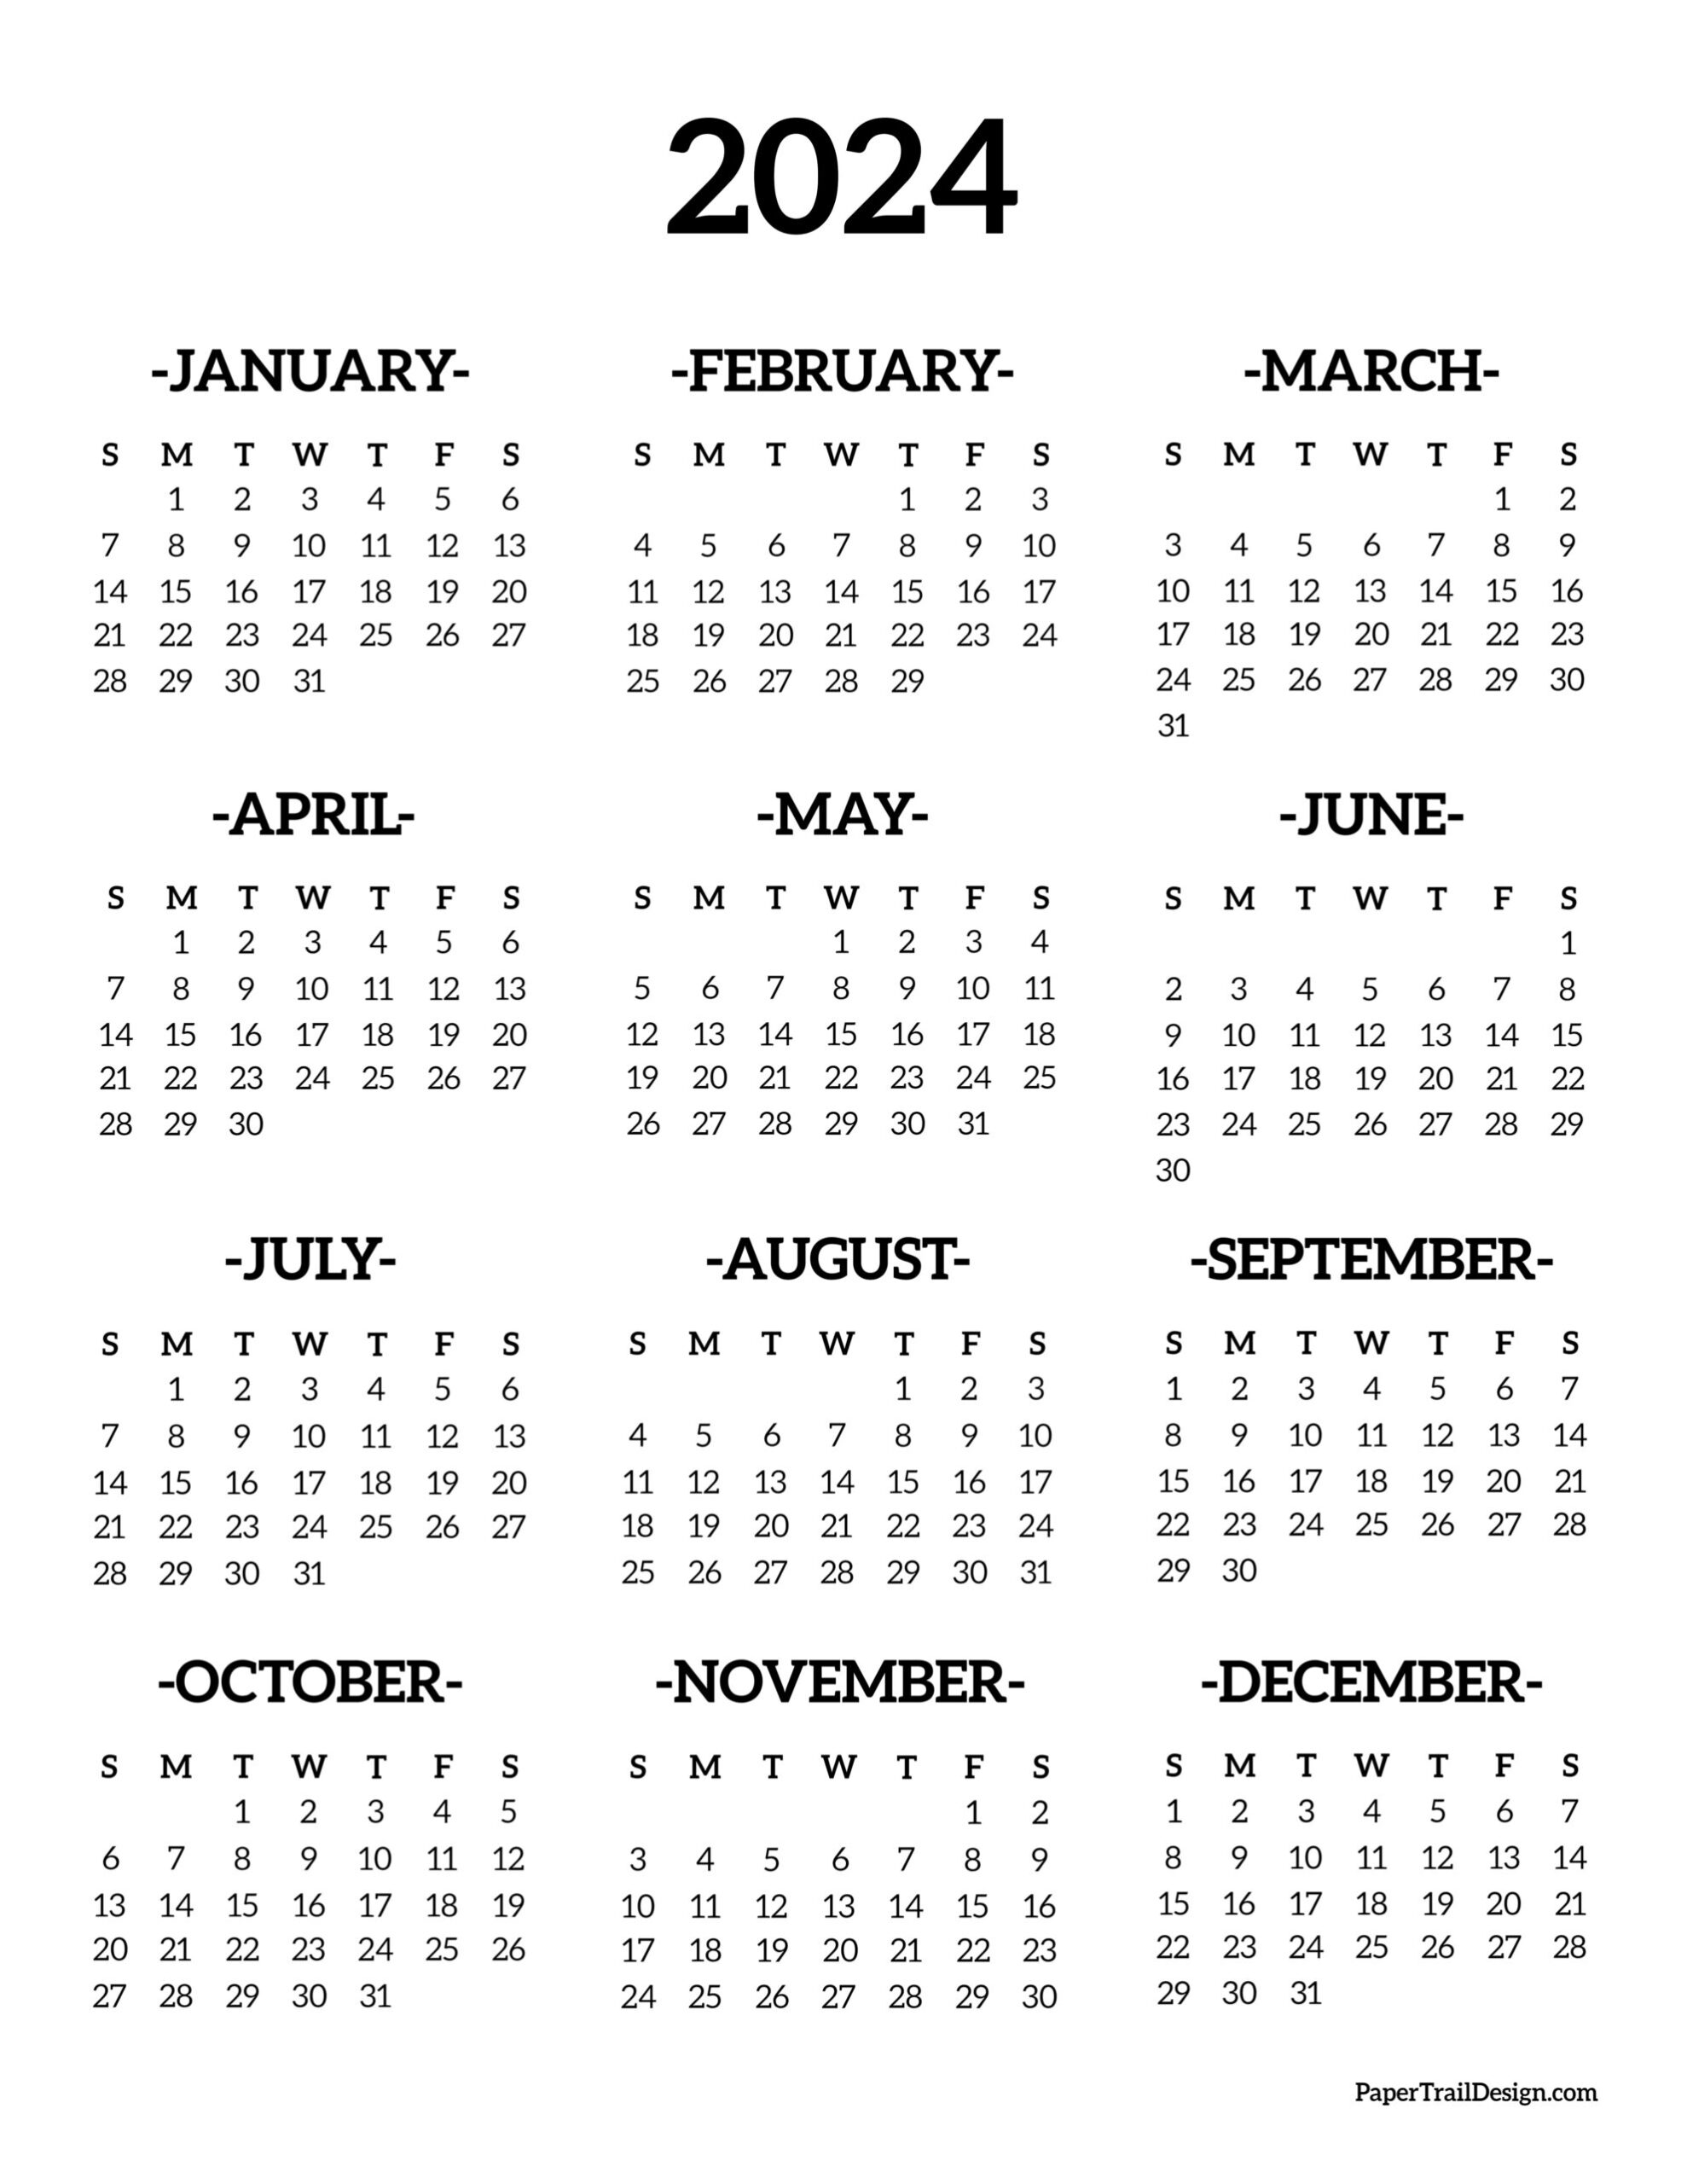 Calendar 2024 Printable One Page - Paper Trail Design for Calendar Year 2024 Printable